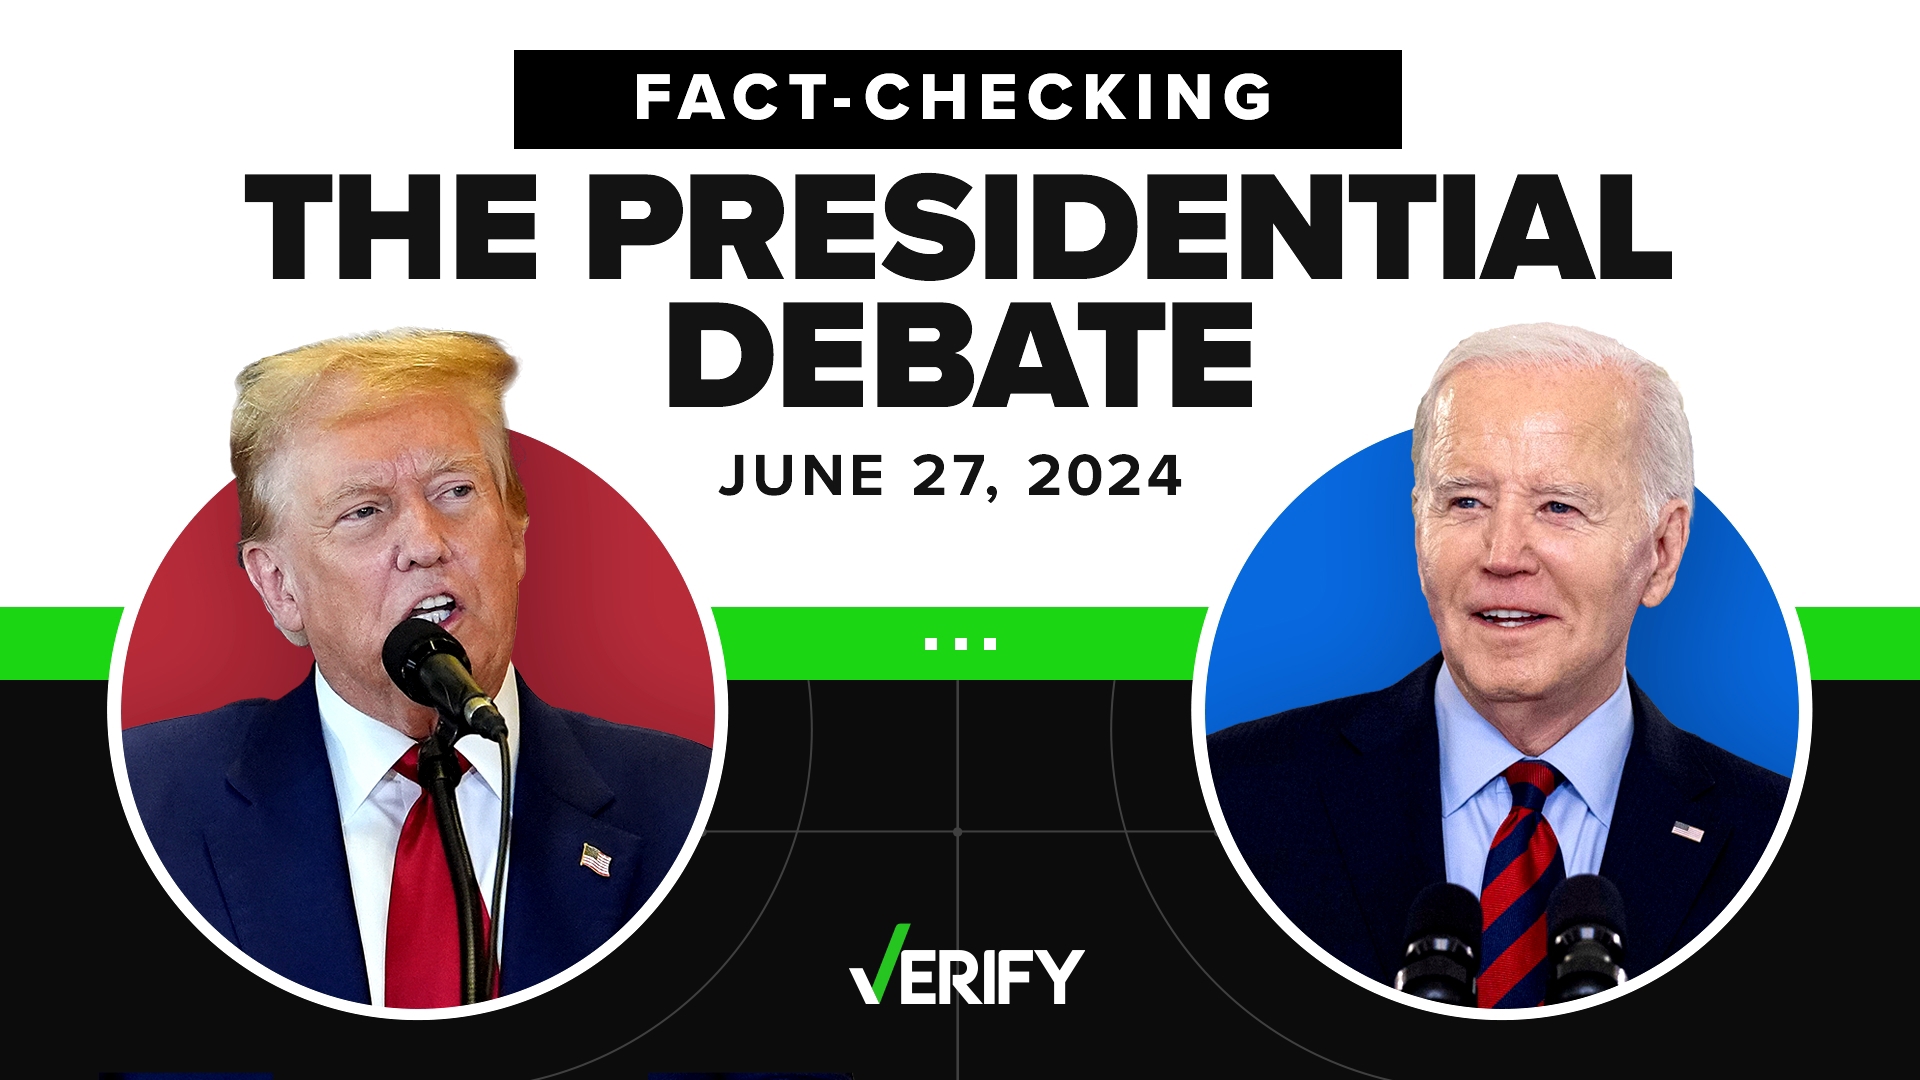 VERIFY fact-checked claims from presidential candidates Donald Trump and Joe Biden during their first debate for the 2024 general election.